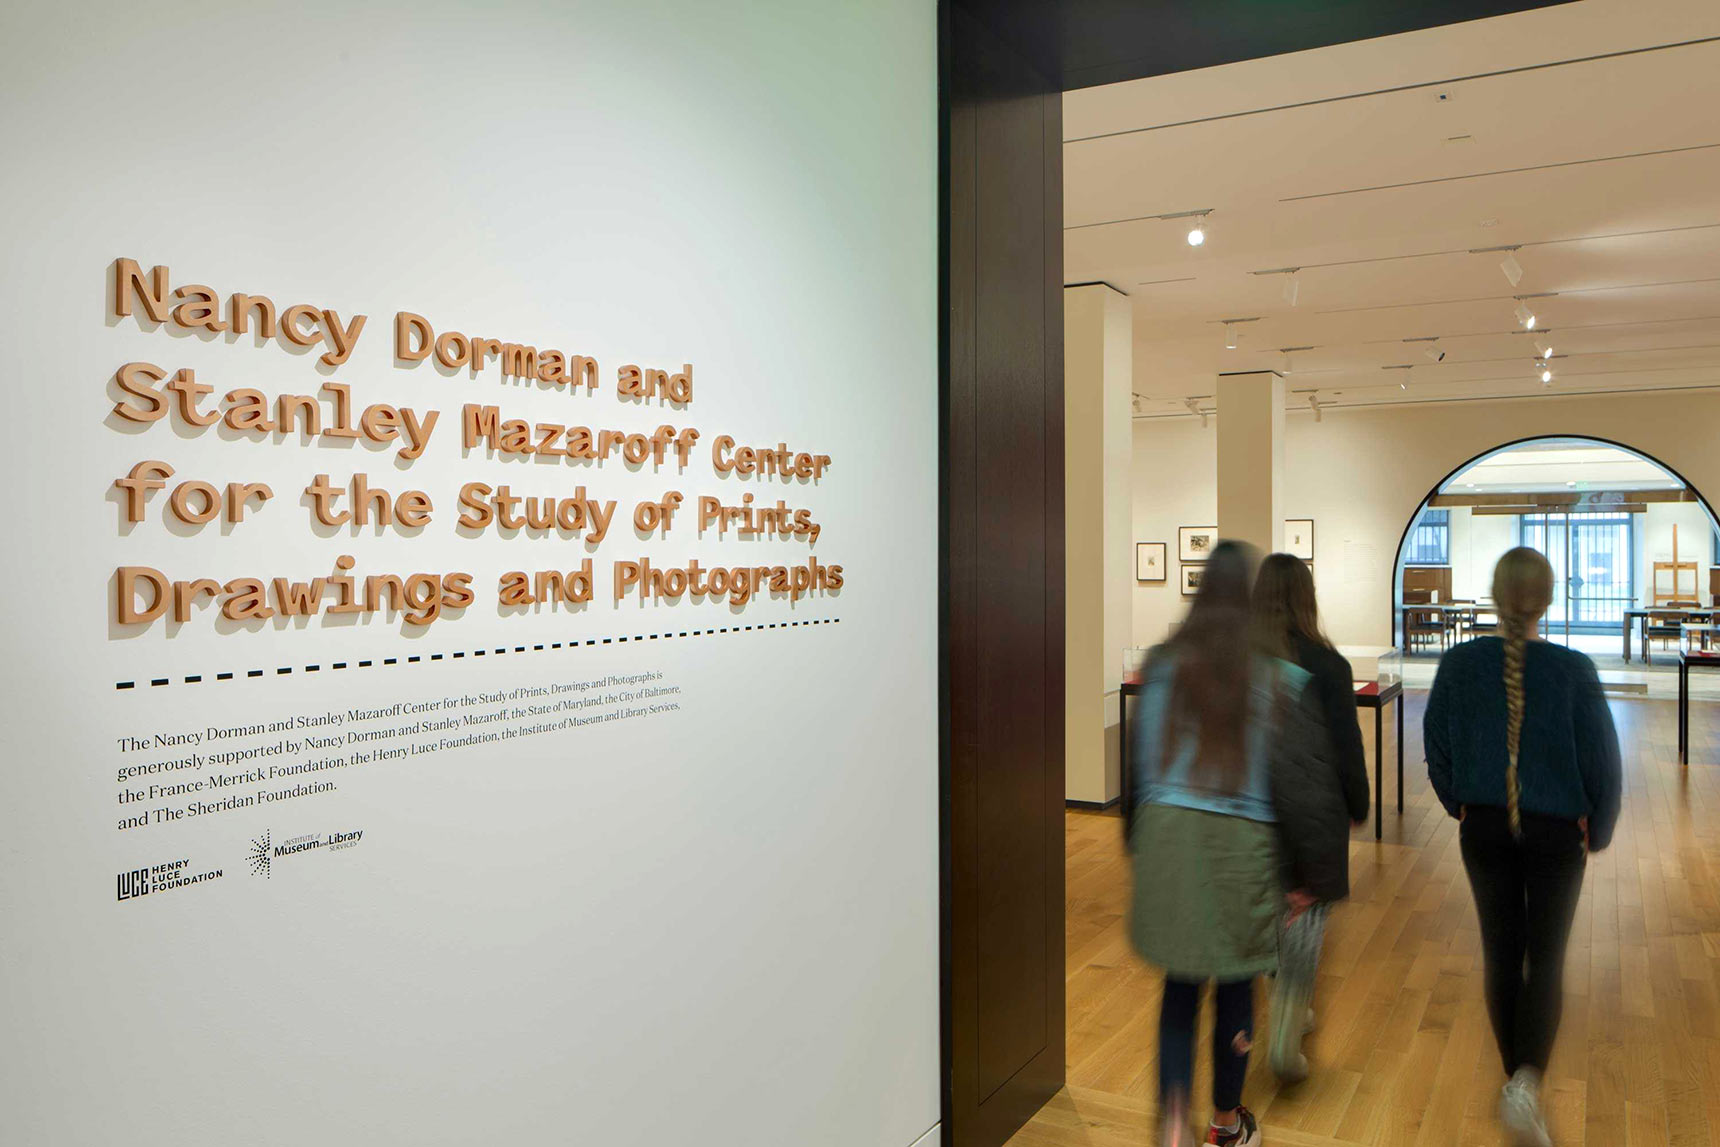 Baltimore Museum of Art brand identity and wayfinding signage